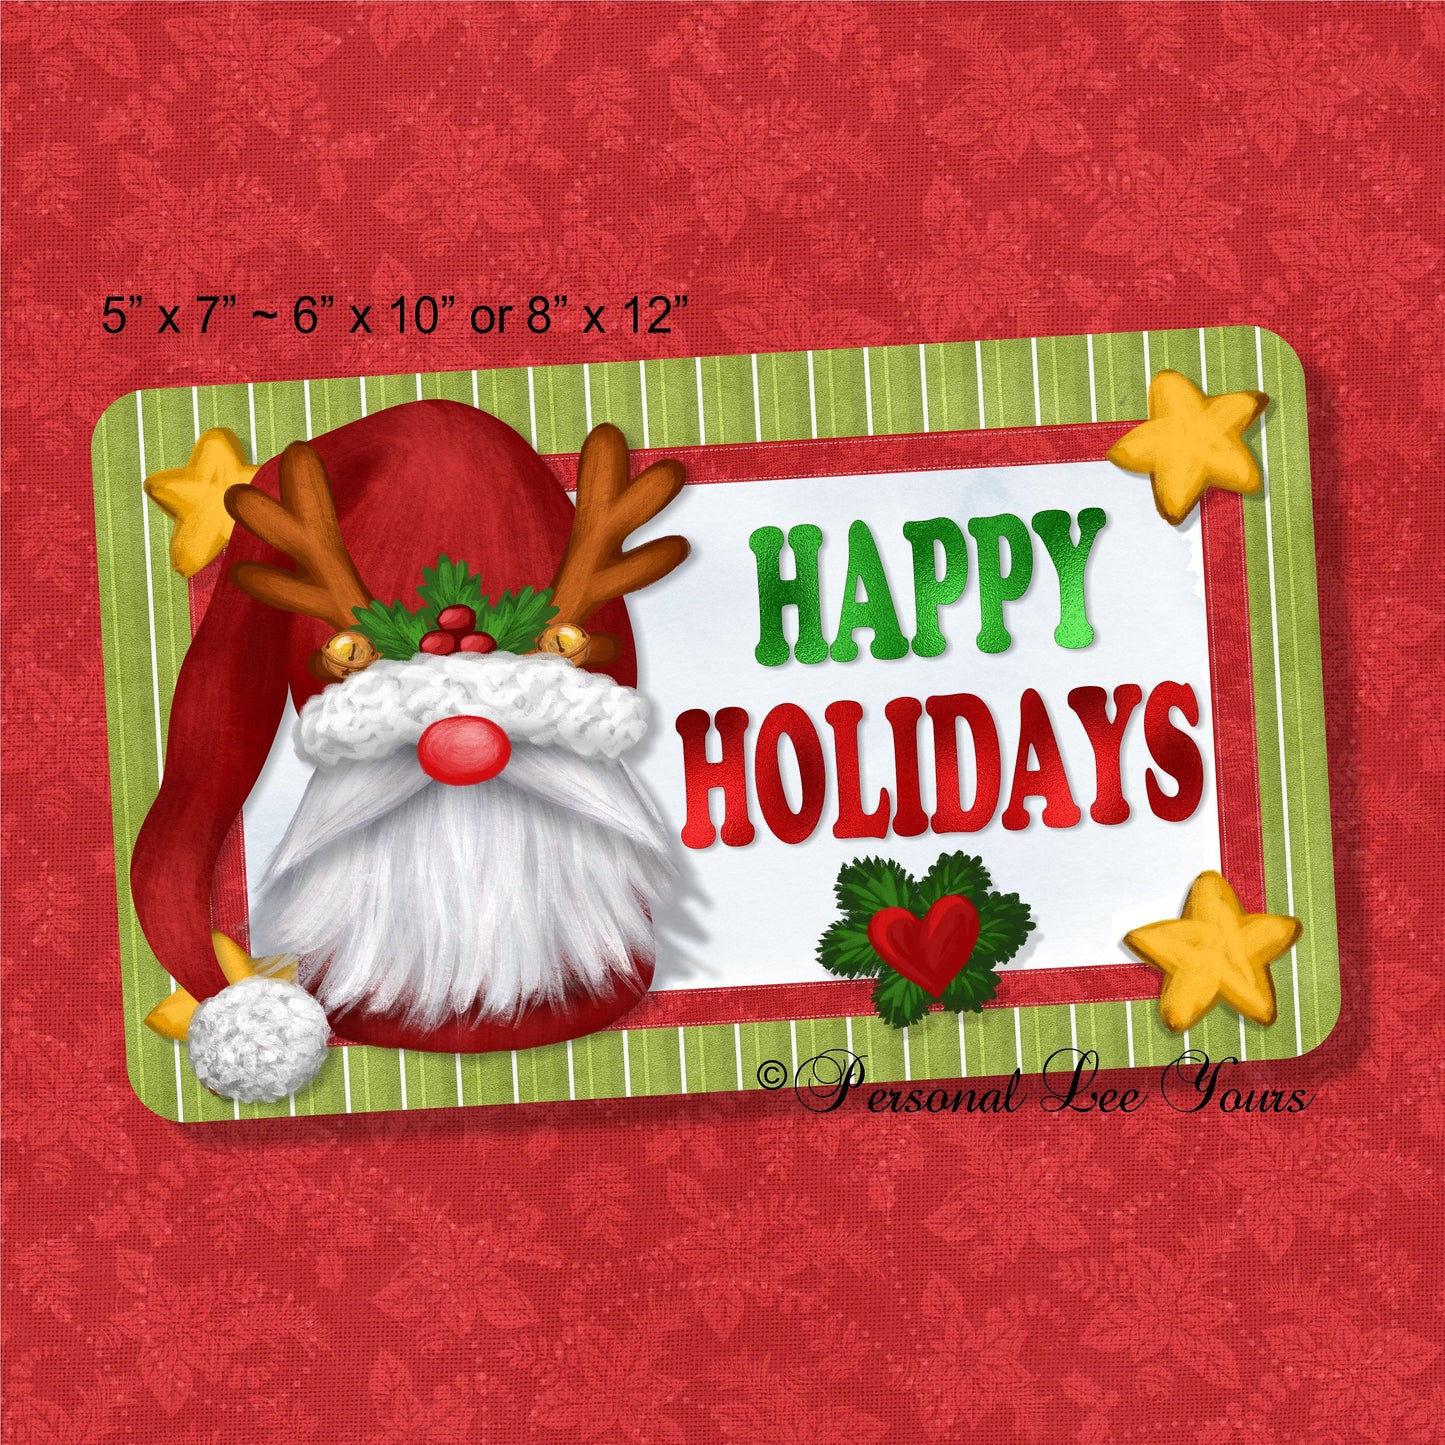 Christmas Wreath Sign * Happy Holidays Gnome * 3 Sizes * Lightweight Metal